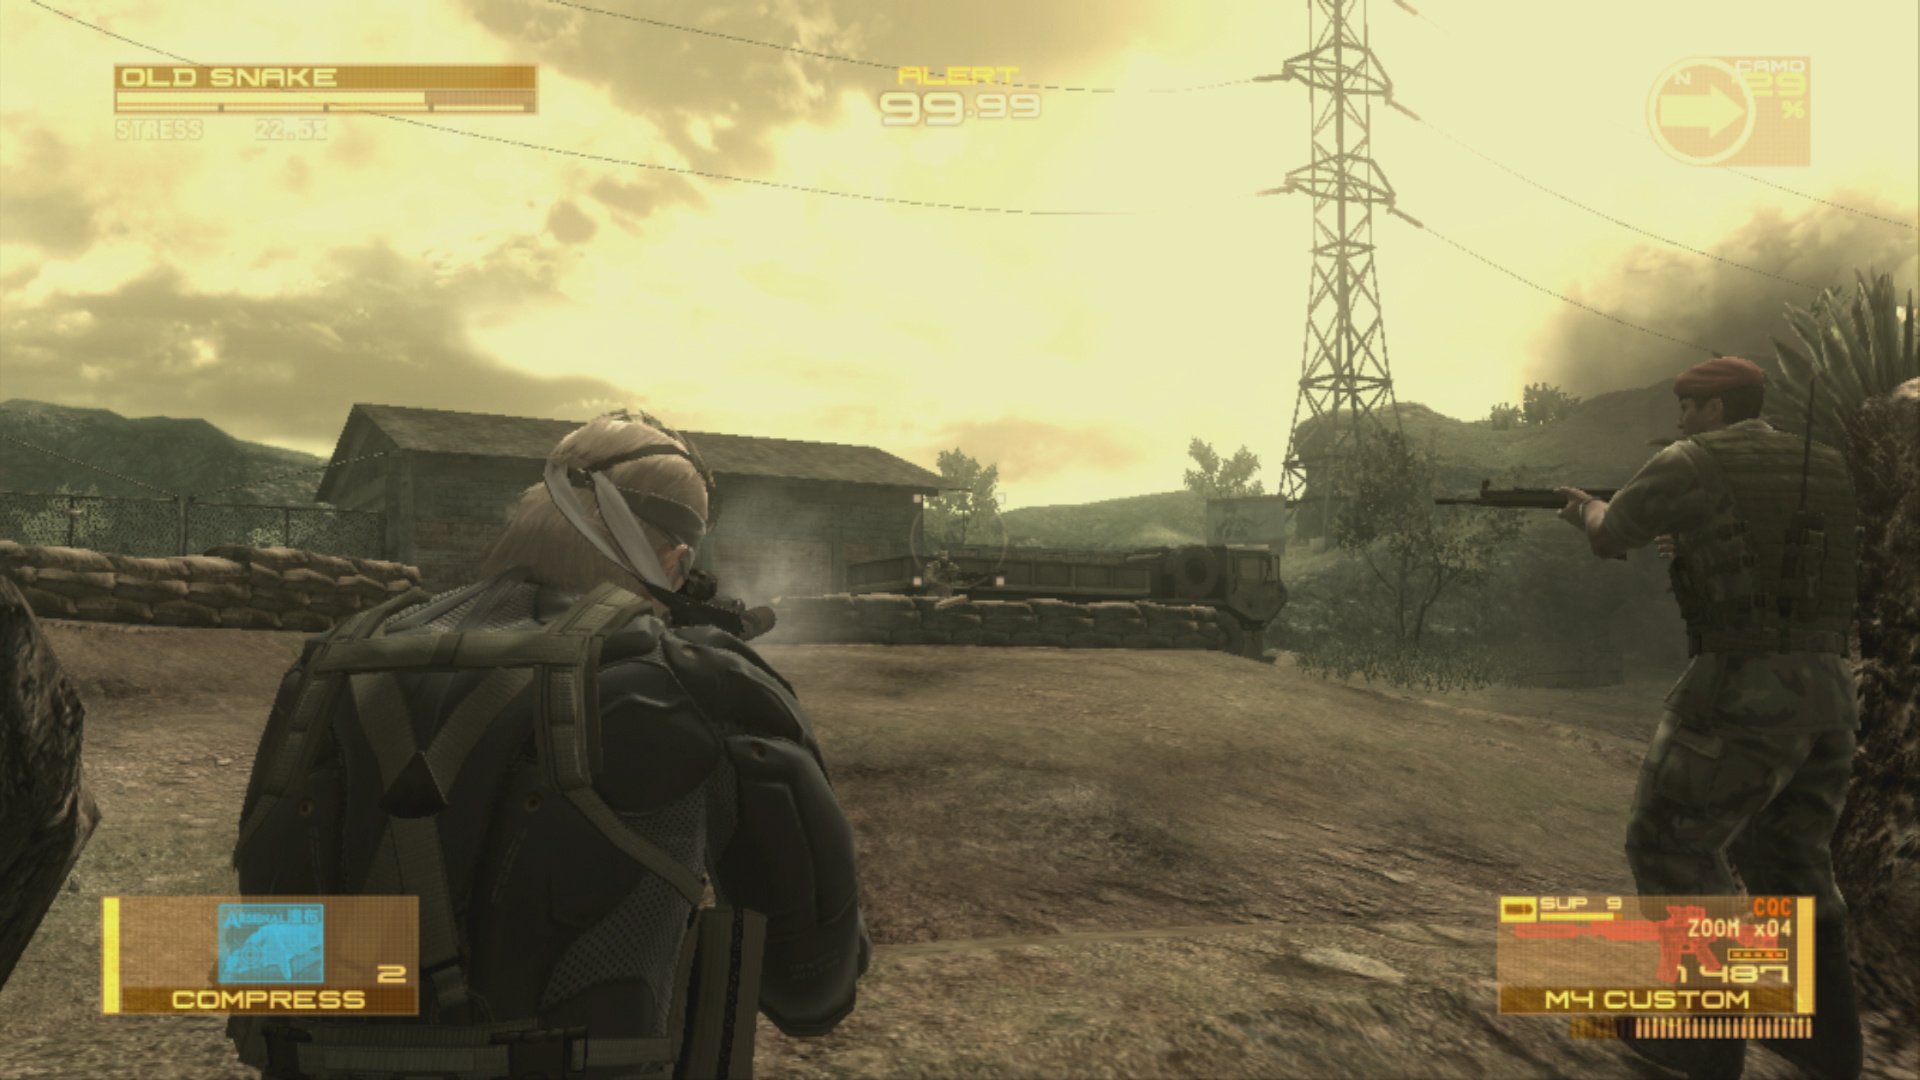 Metal Gear Solid 4: Guns of the Patriots (PS3, 2008) – Pixel Hunted